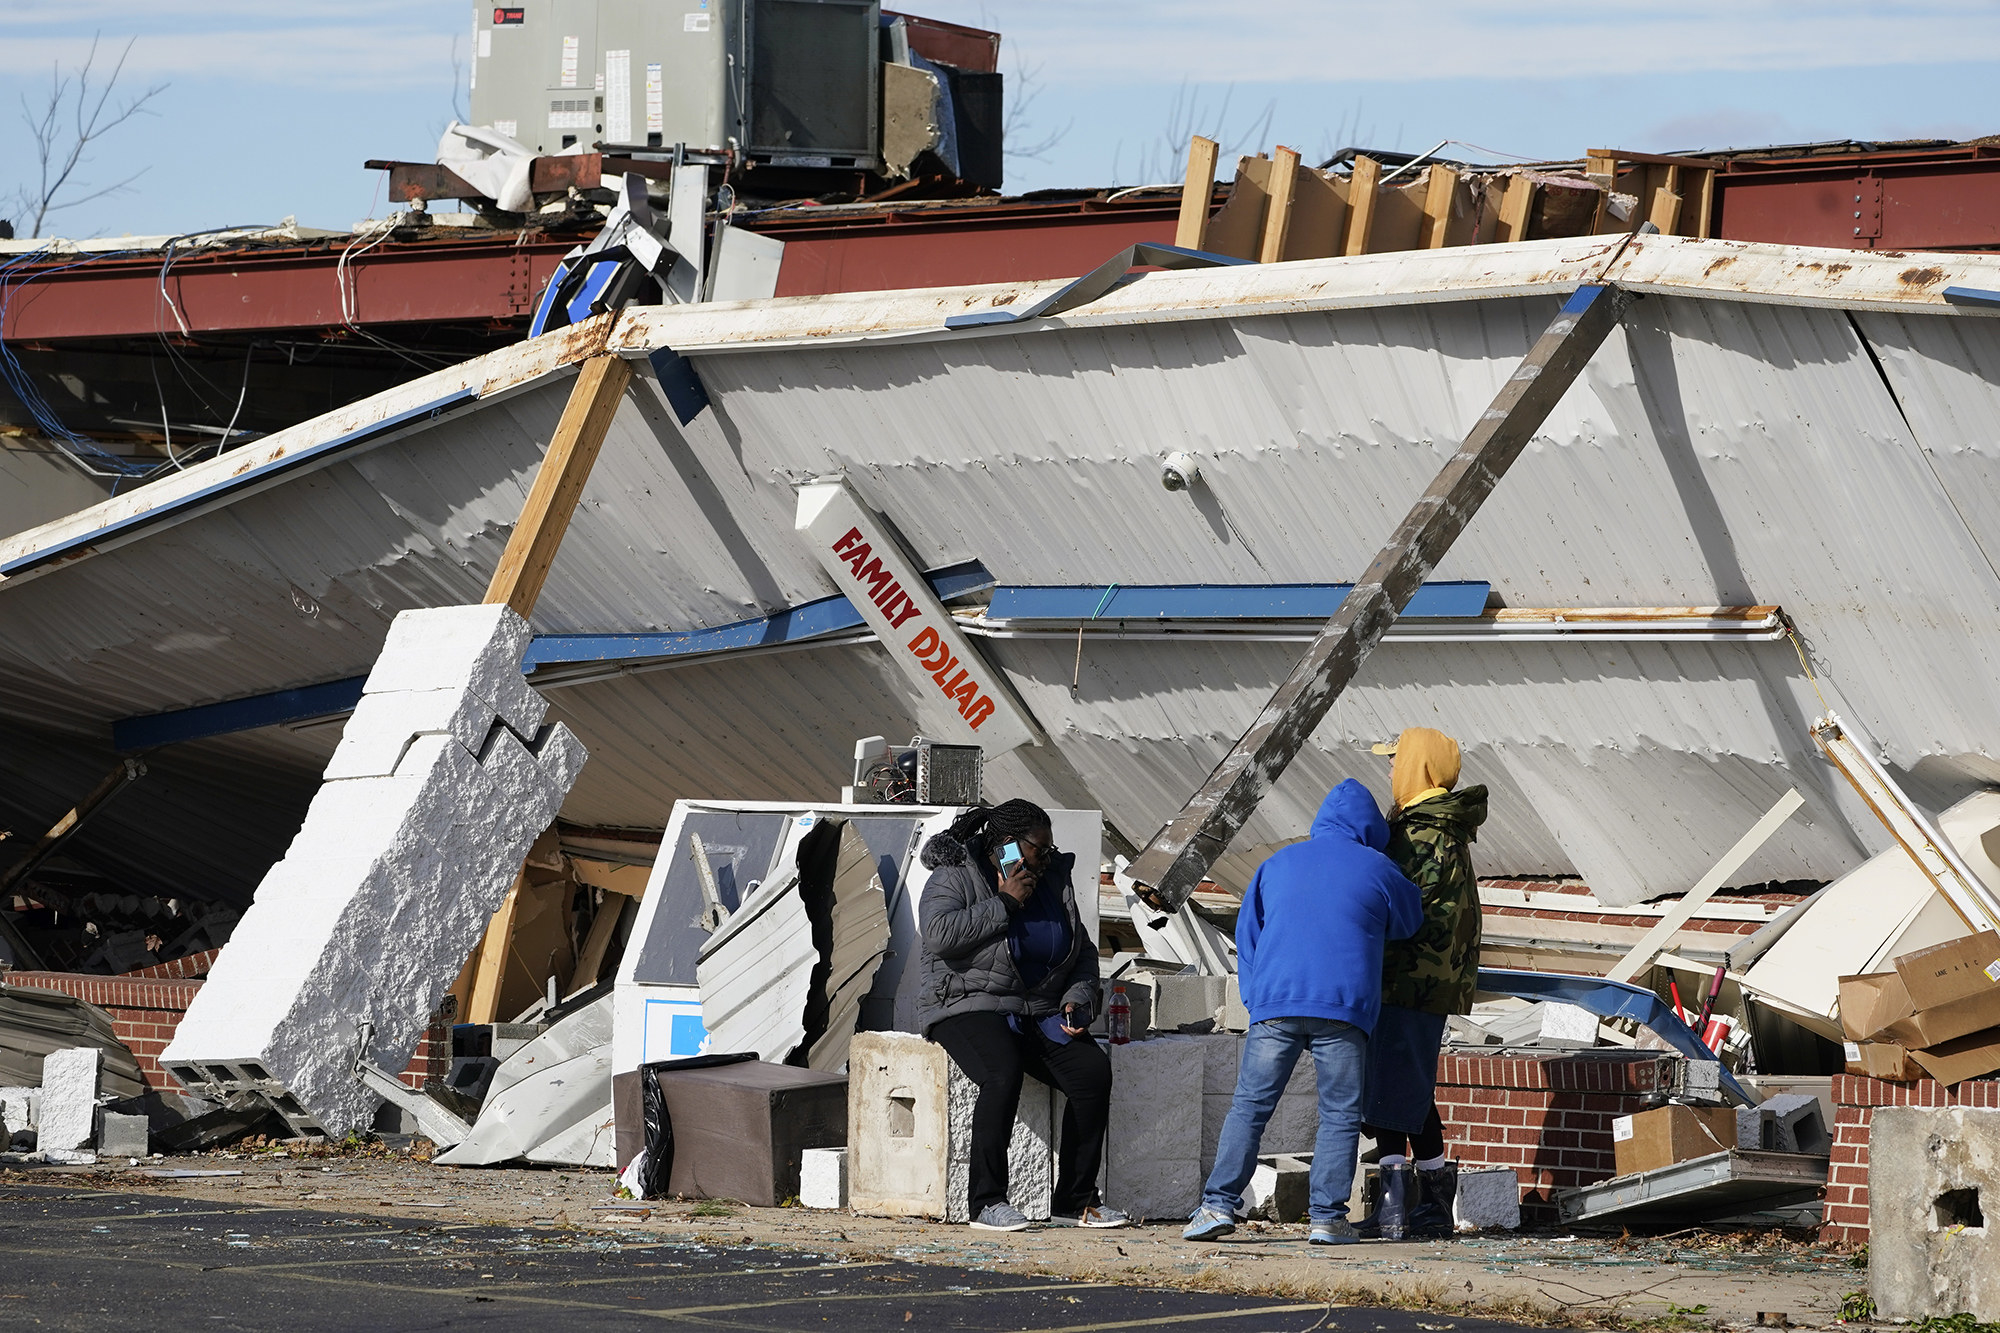 A &quot;Family Dollar&quot; sign is seen on a collapsed awning as people sit and stand nearby